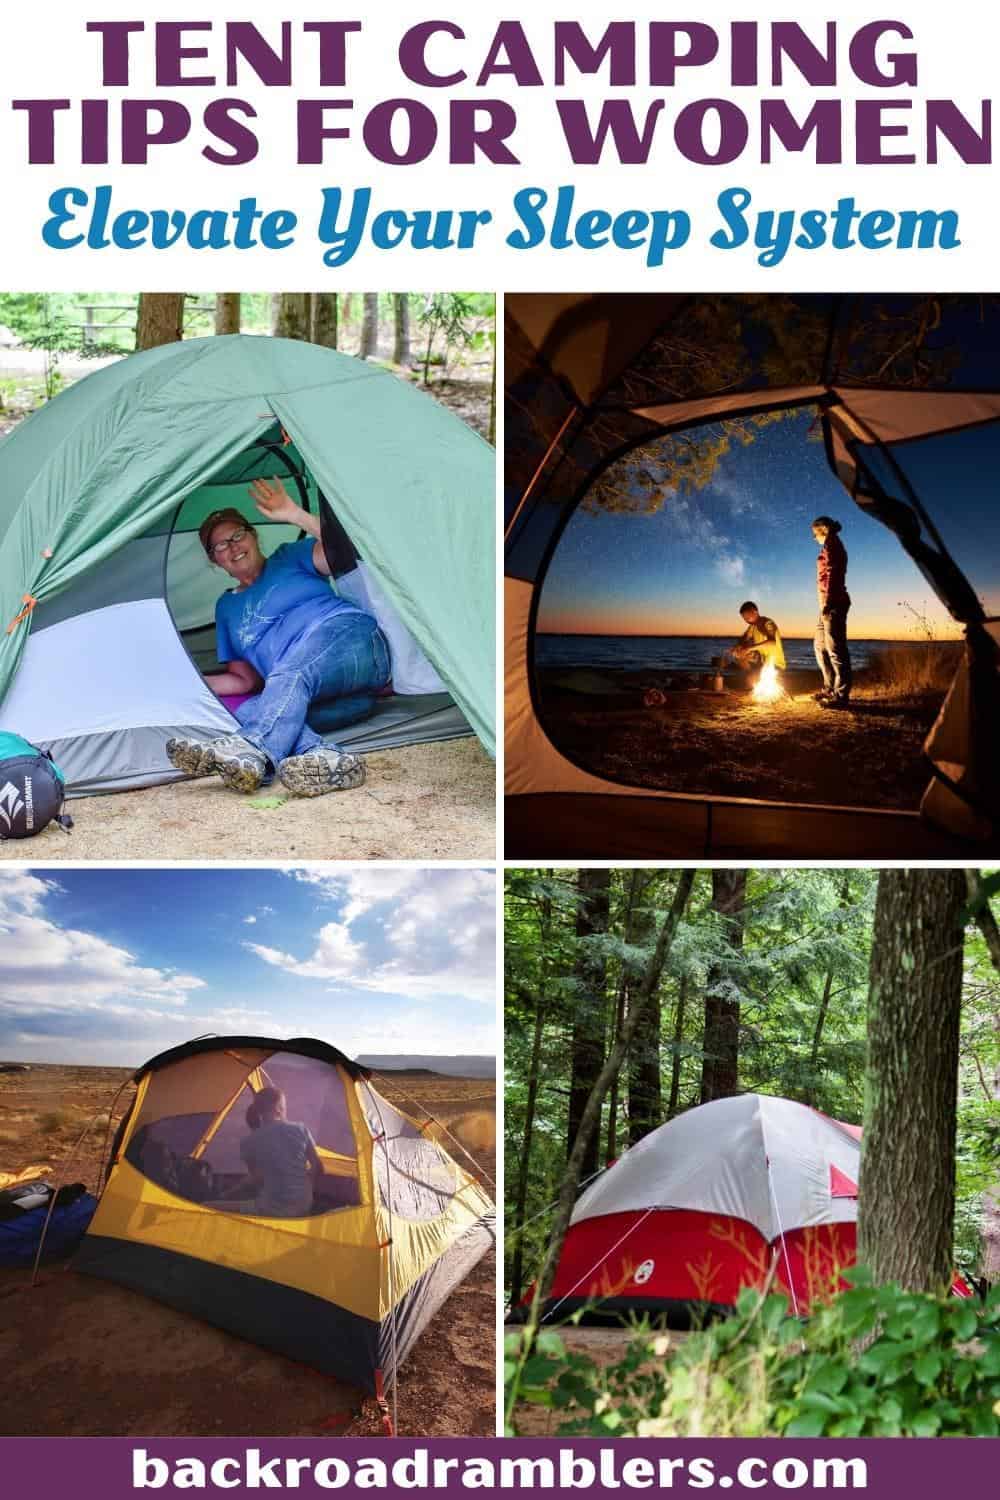 A collage of photos featuring women sleeping in tents while camping. Text overlay: tent camping tips for women - elevate your sleep system.